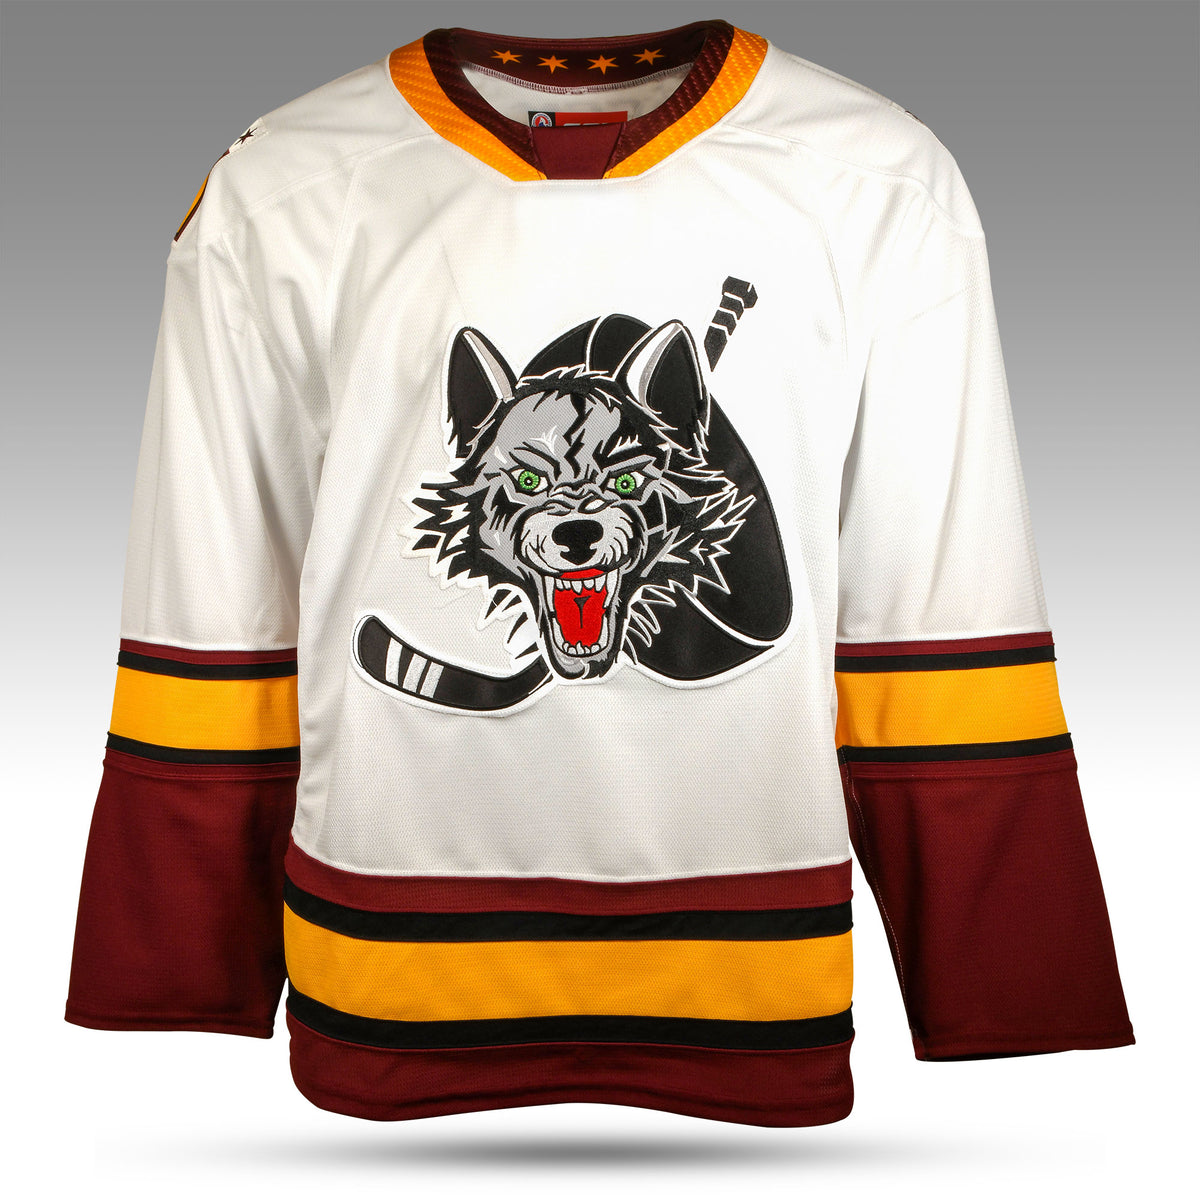 Chicago Wolves CCM Replica Quicklite Black Alternate Jersey 4XL (+$15) / Yes - Approx. 12 Weeks (+$75)